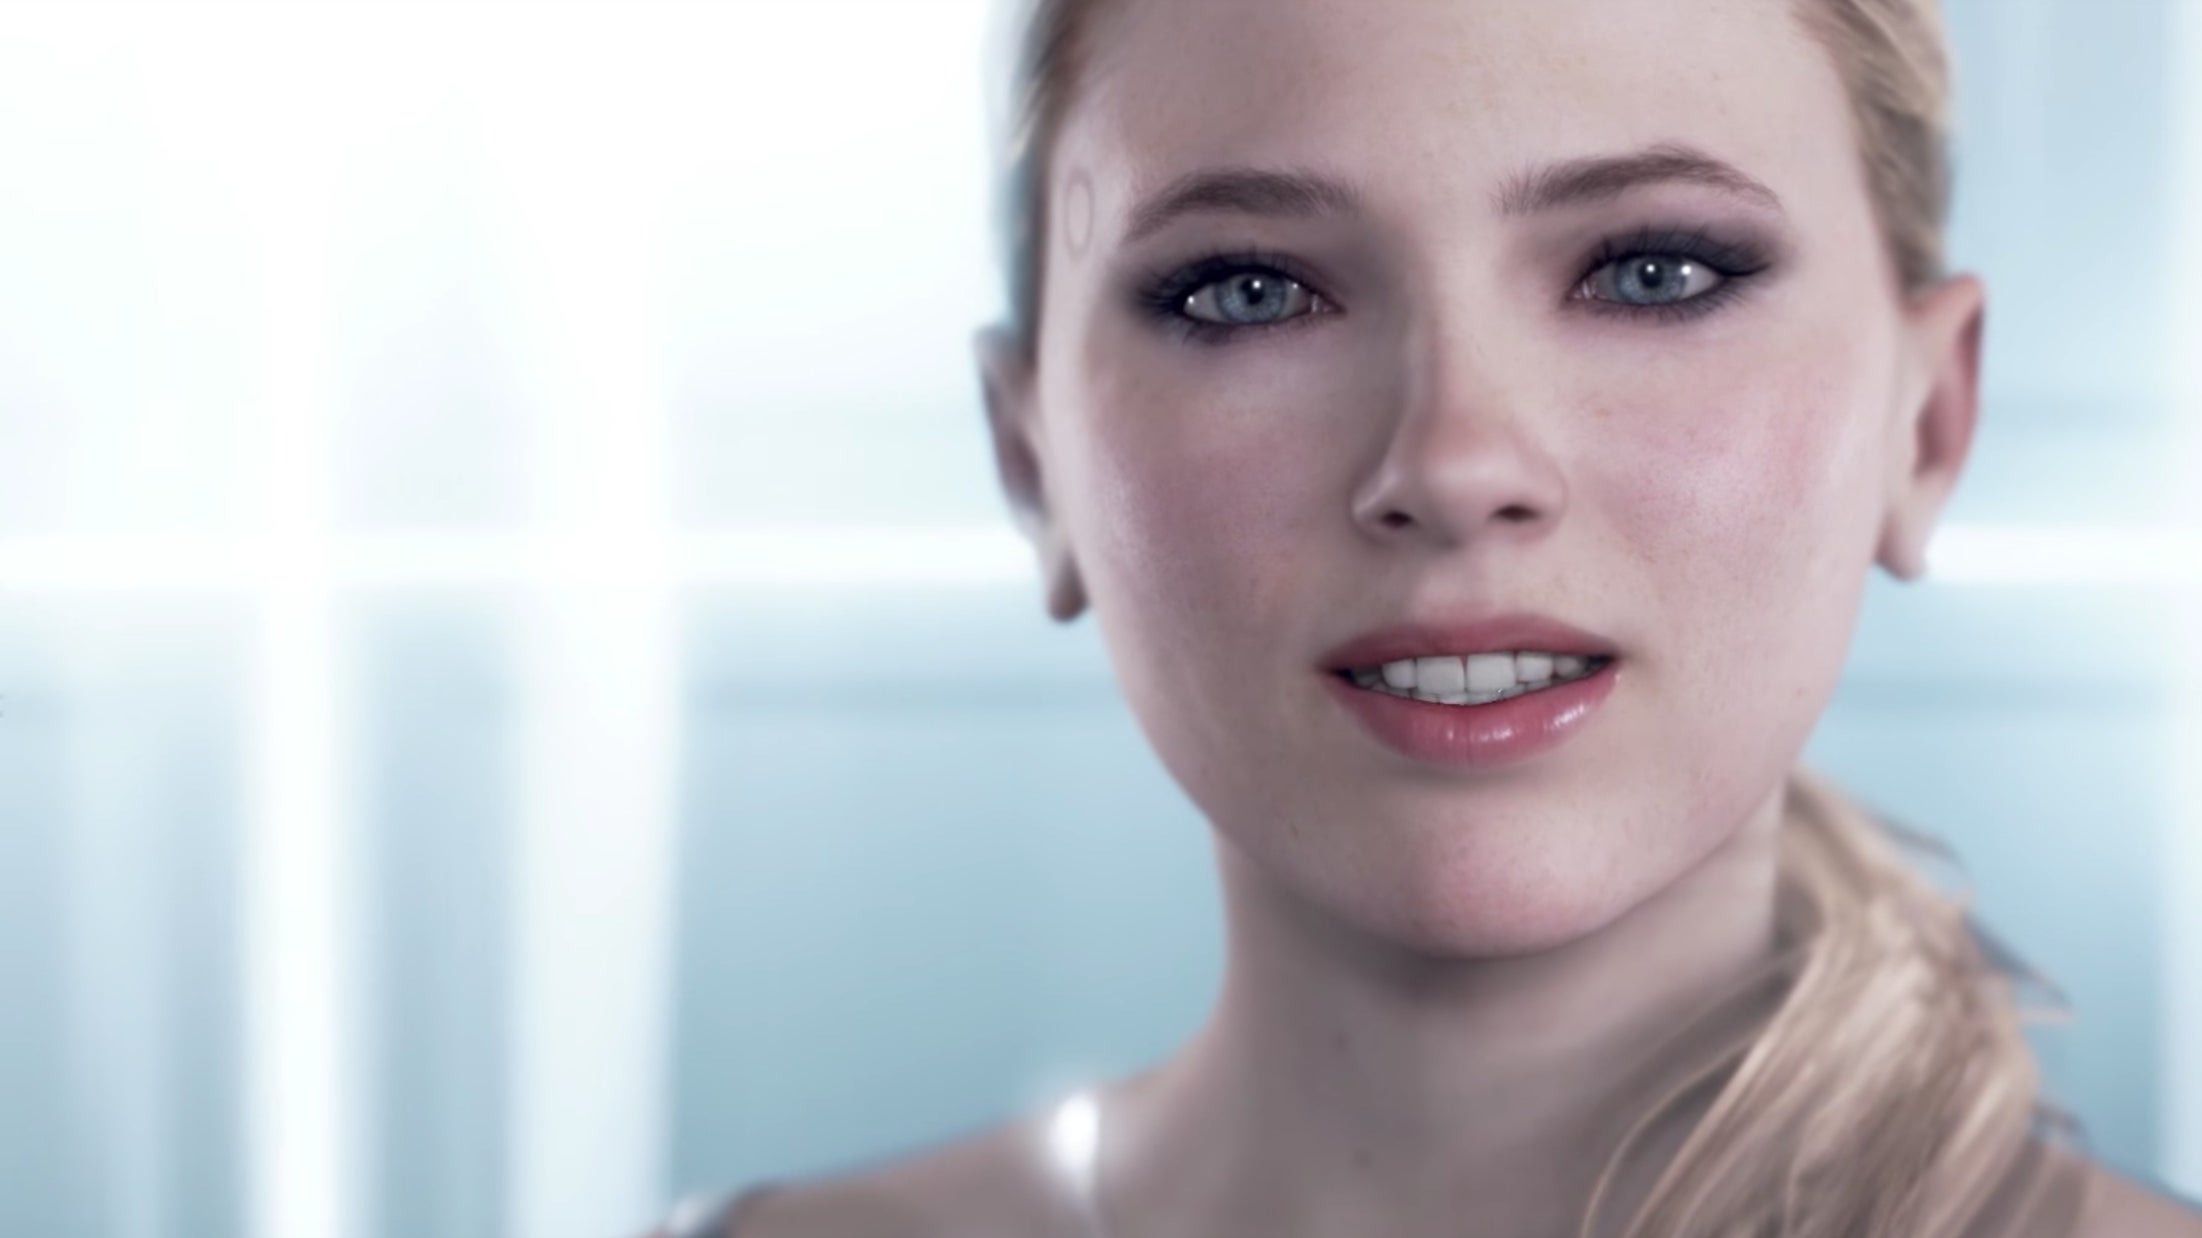 Detroit: Become Human - clumsy yet effective robot-rights thriller |